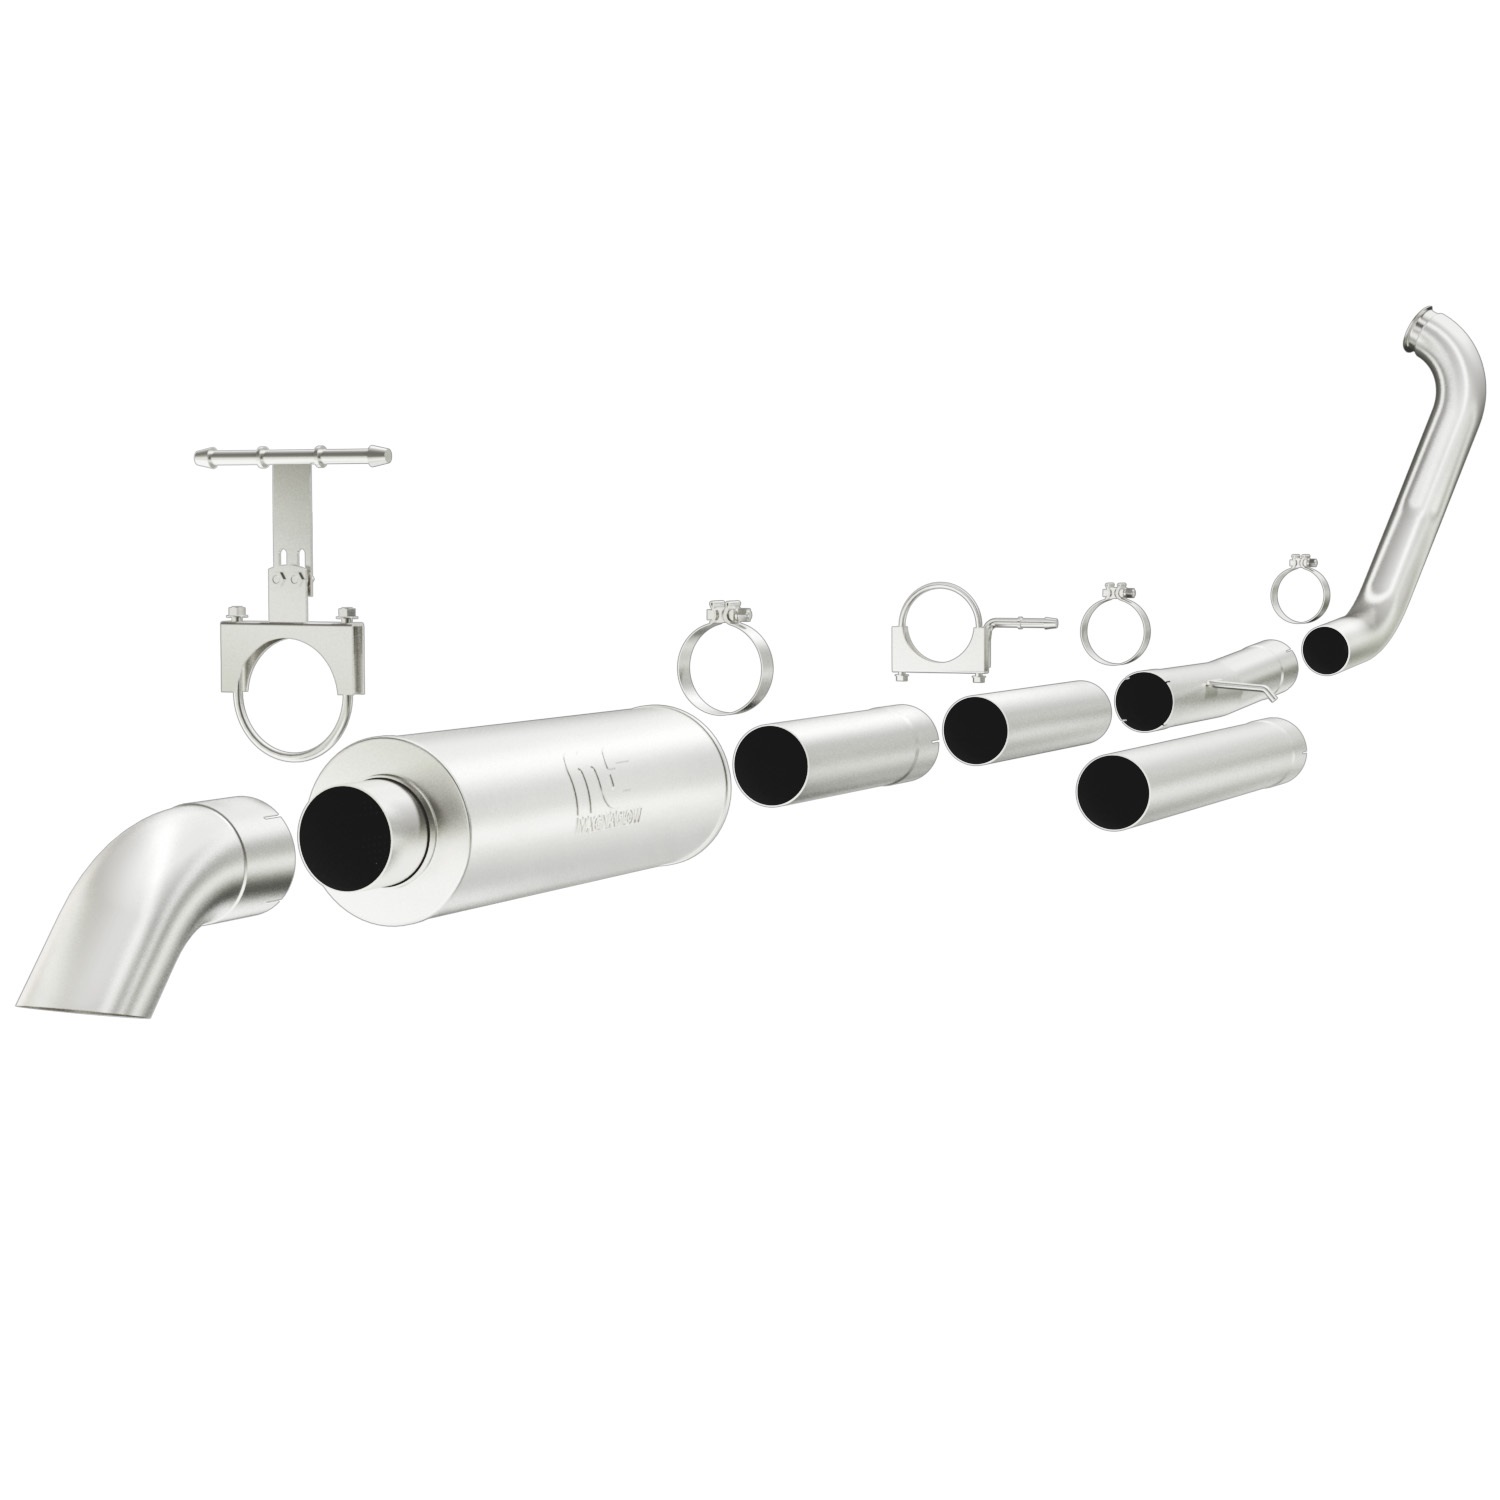 Magnaflow Performance Exhaust Magnaflow Performance Exhaust 17135 Off Road Pro Series Turbo Back System